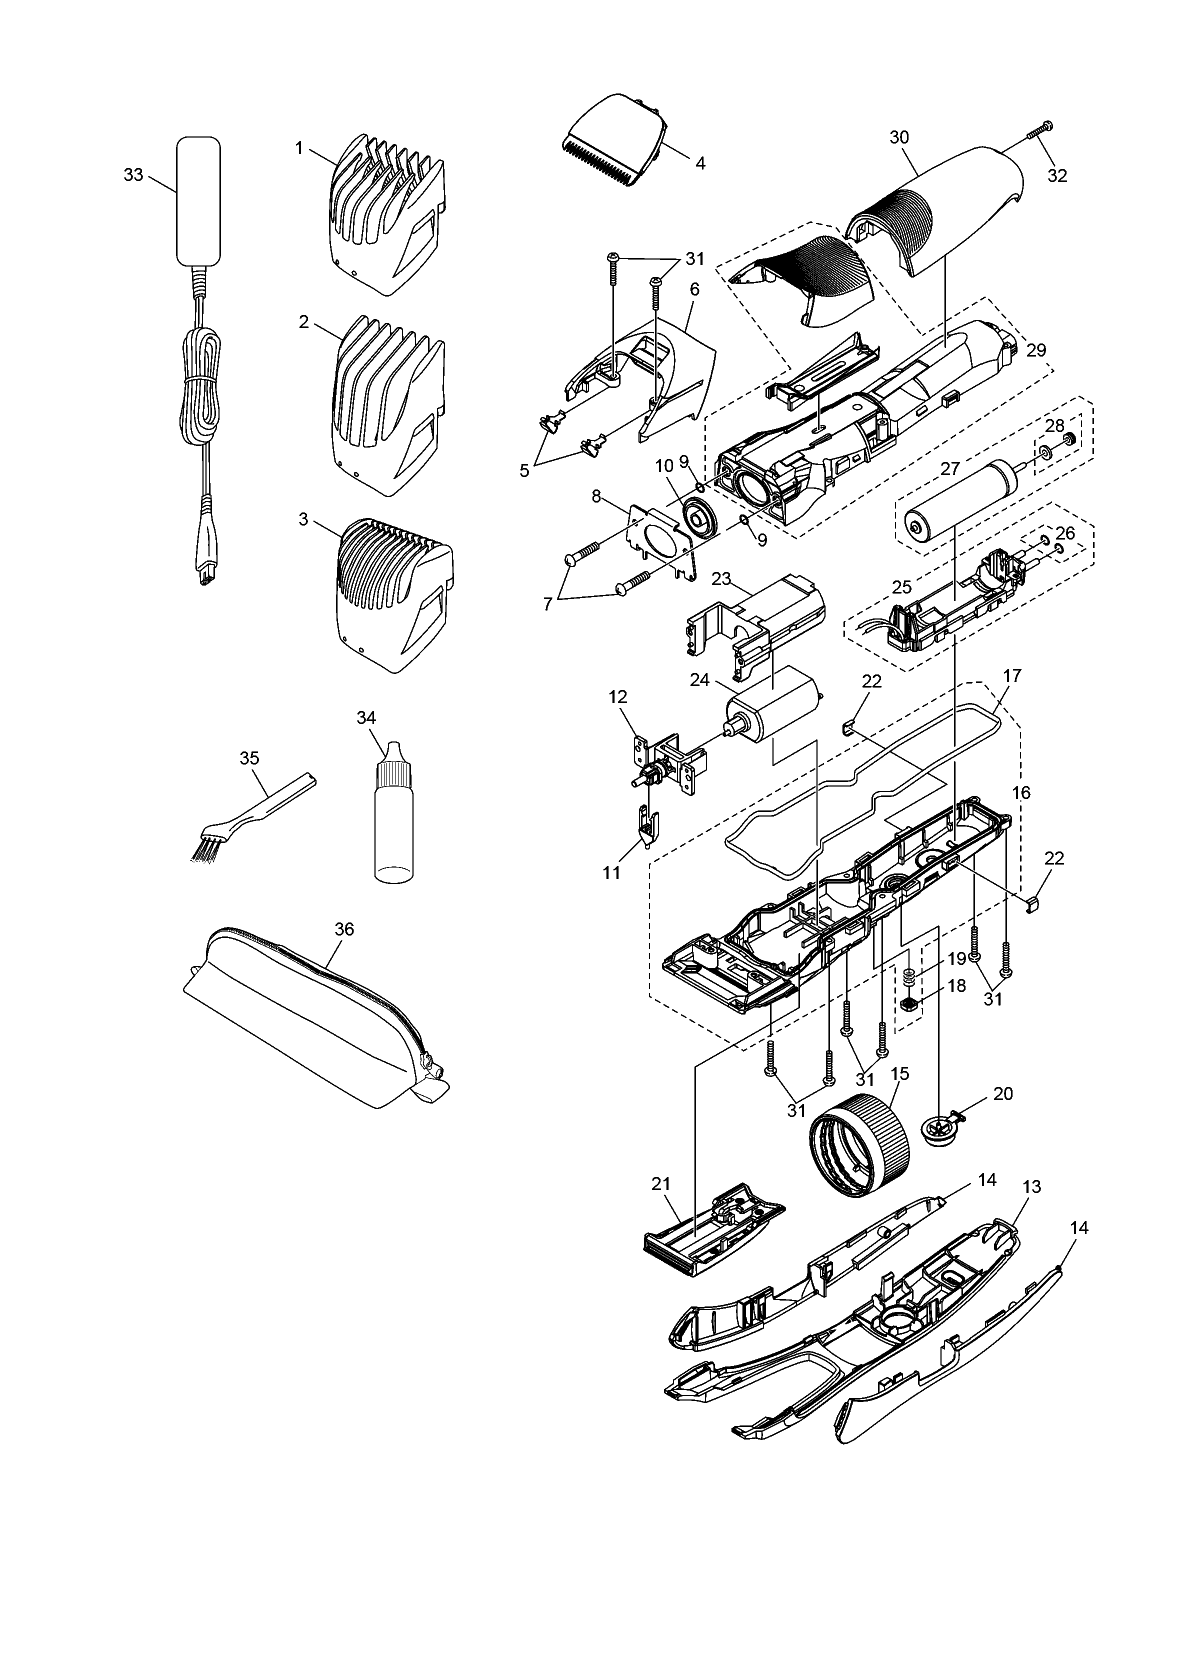 ER-GB80: Exploded View